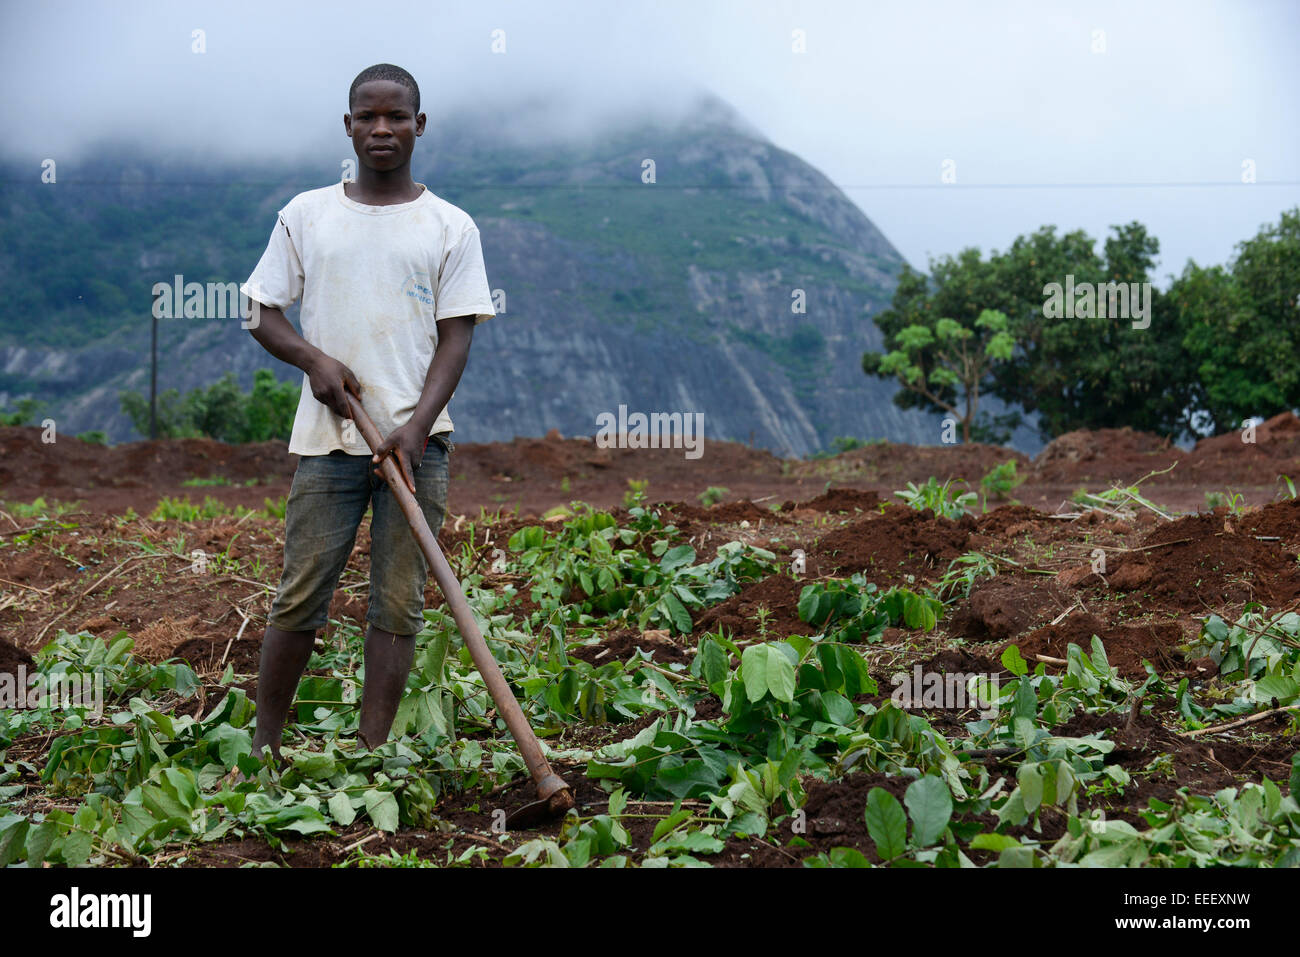 MOZAMBIQUE, Sussundenga, BAGC Beira agricultural growth corridor, small scale farmer work on their farm with hoe to plant maize / MOSAMBIK, Sussundenga, BAGC Beira agricultural growth corridor, Kleinbauern bearbeiten ein Feld fuer den Maisanbau mit Hacke Stock Photo